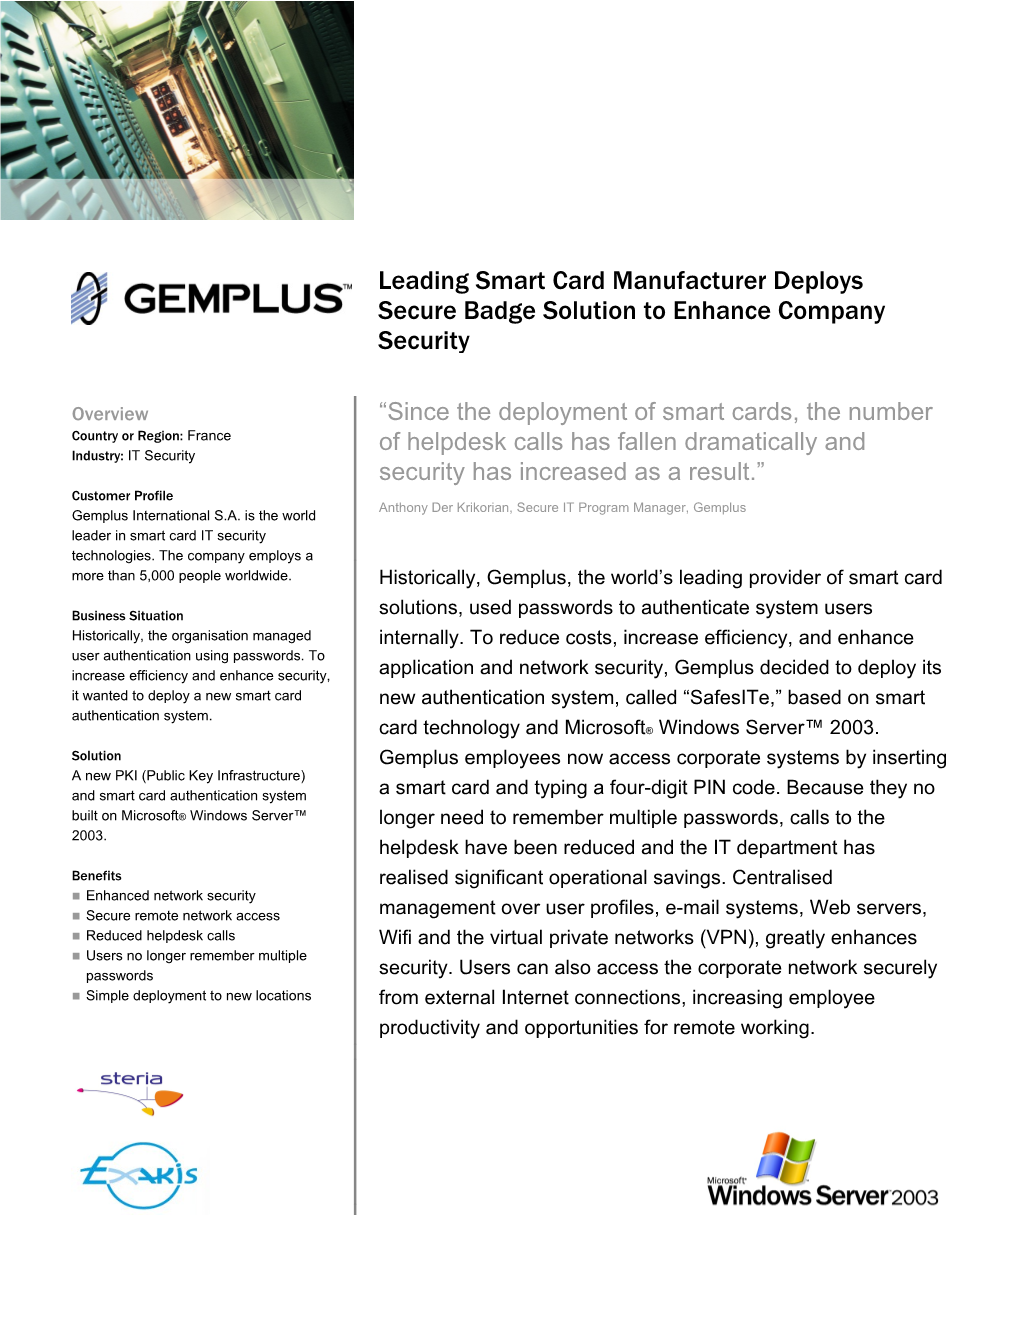 Leading Smart Card Manufacturer Deploys Secure Badge Solution to Enhance Company Security